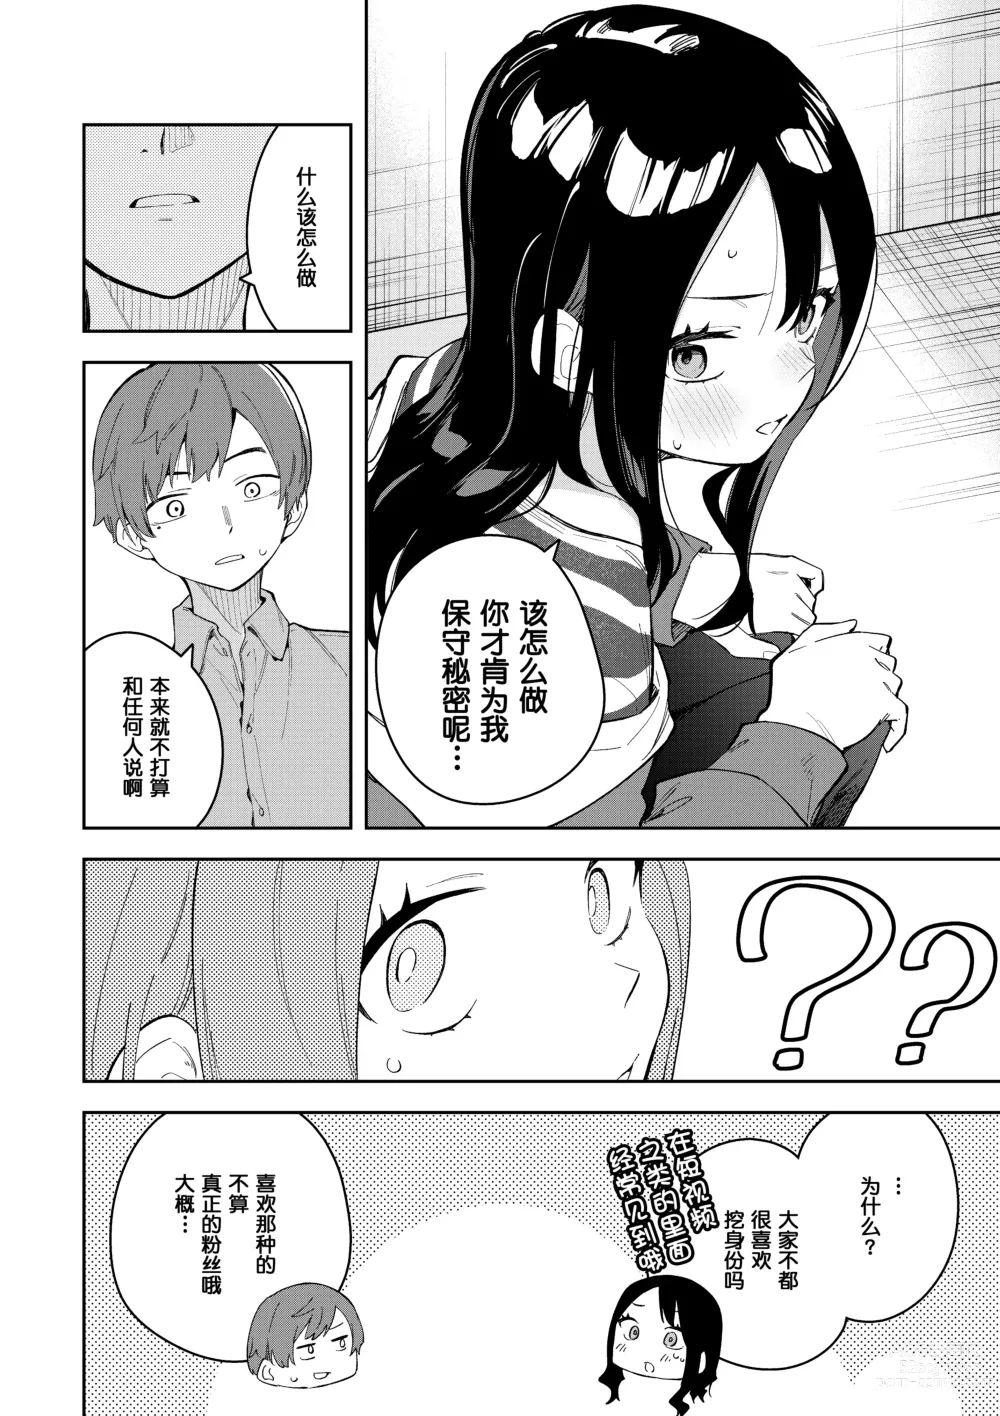 Page 8 of doujinshi 隣人は有名配信者3人目